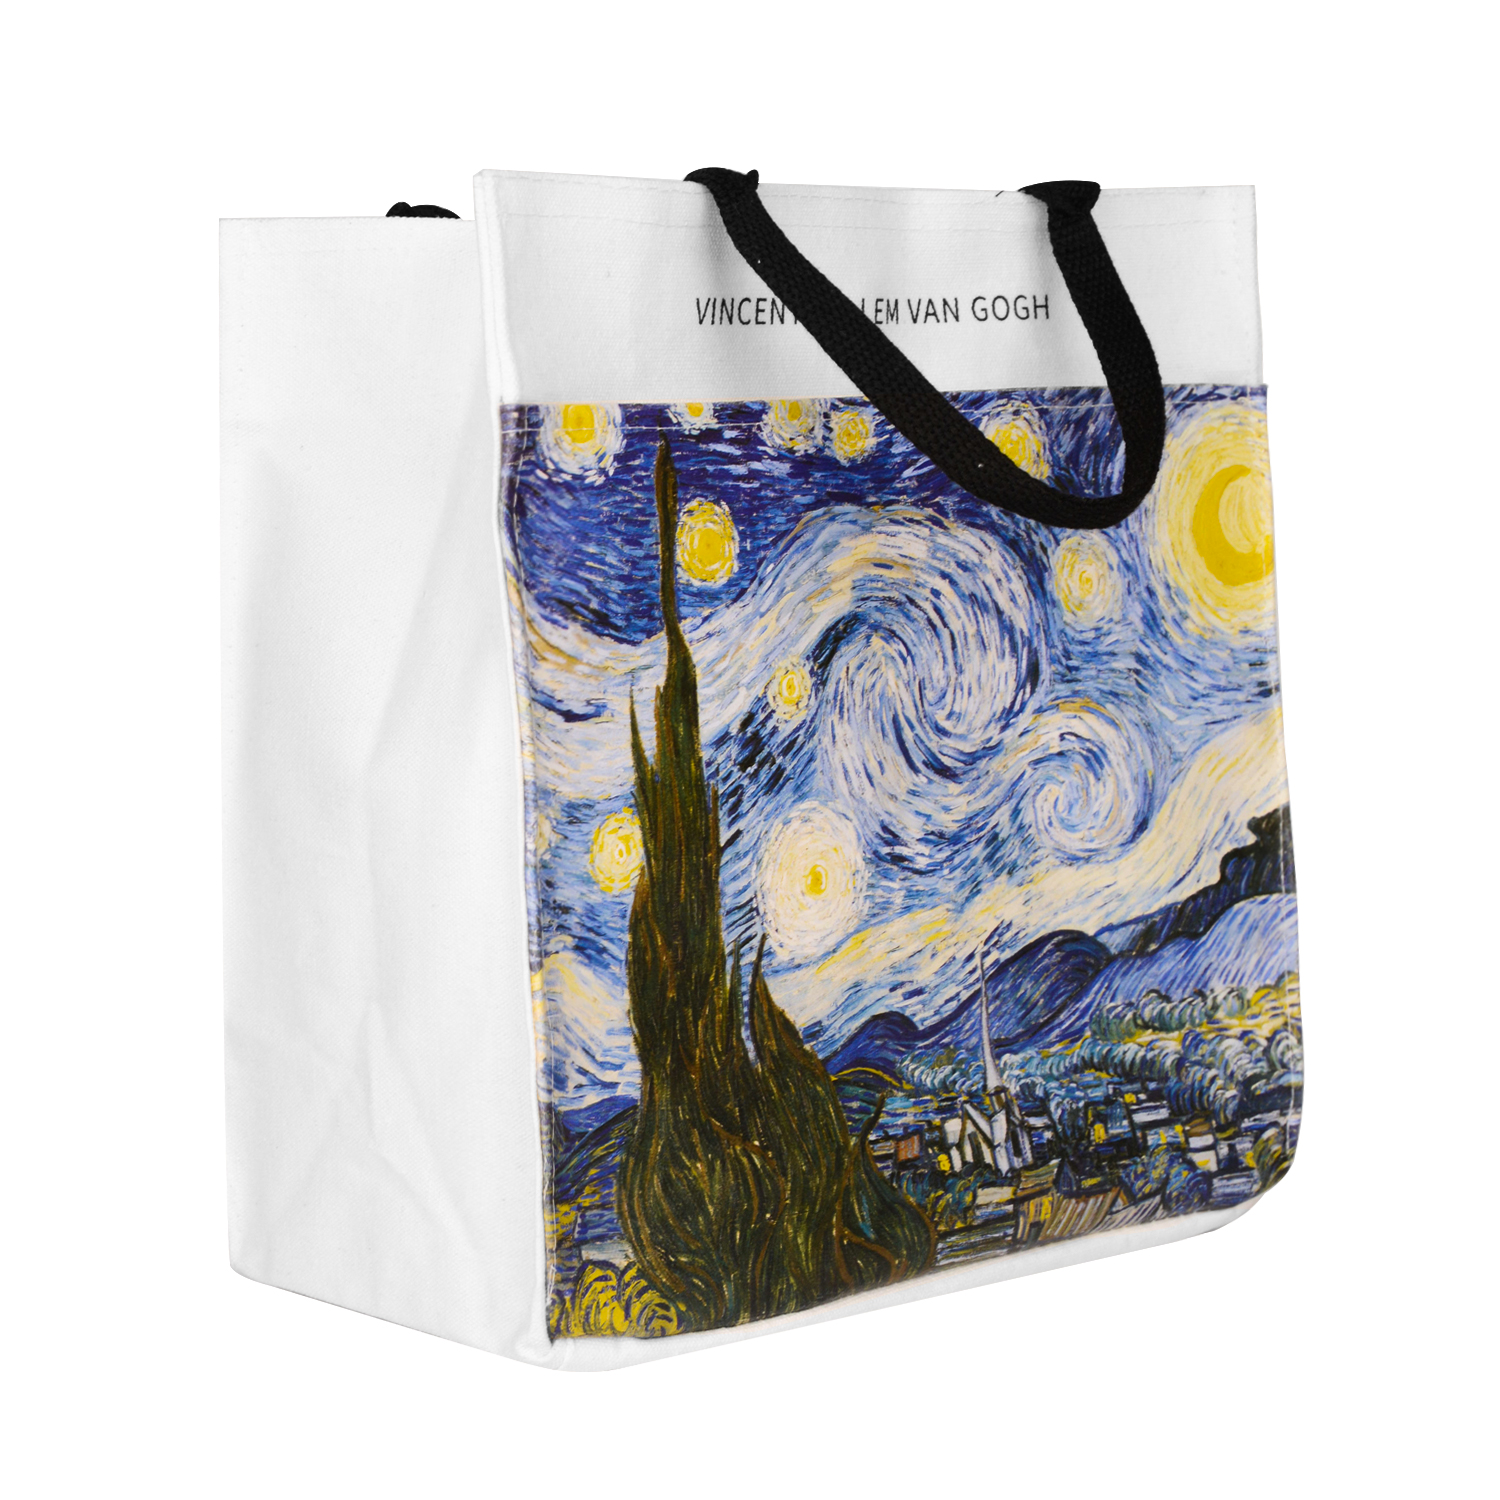 Soma Package Ltd's Commitment to Sustainable Canvas Tote Bags